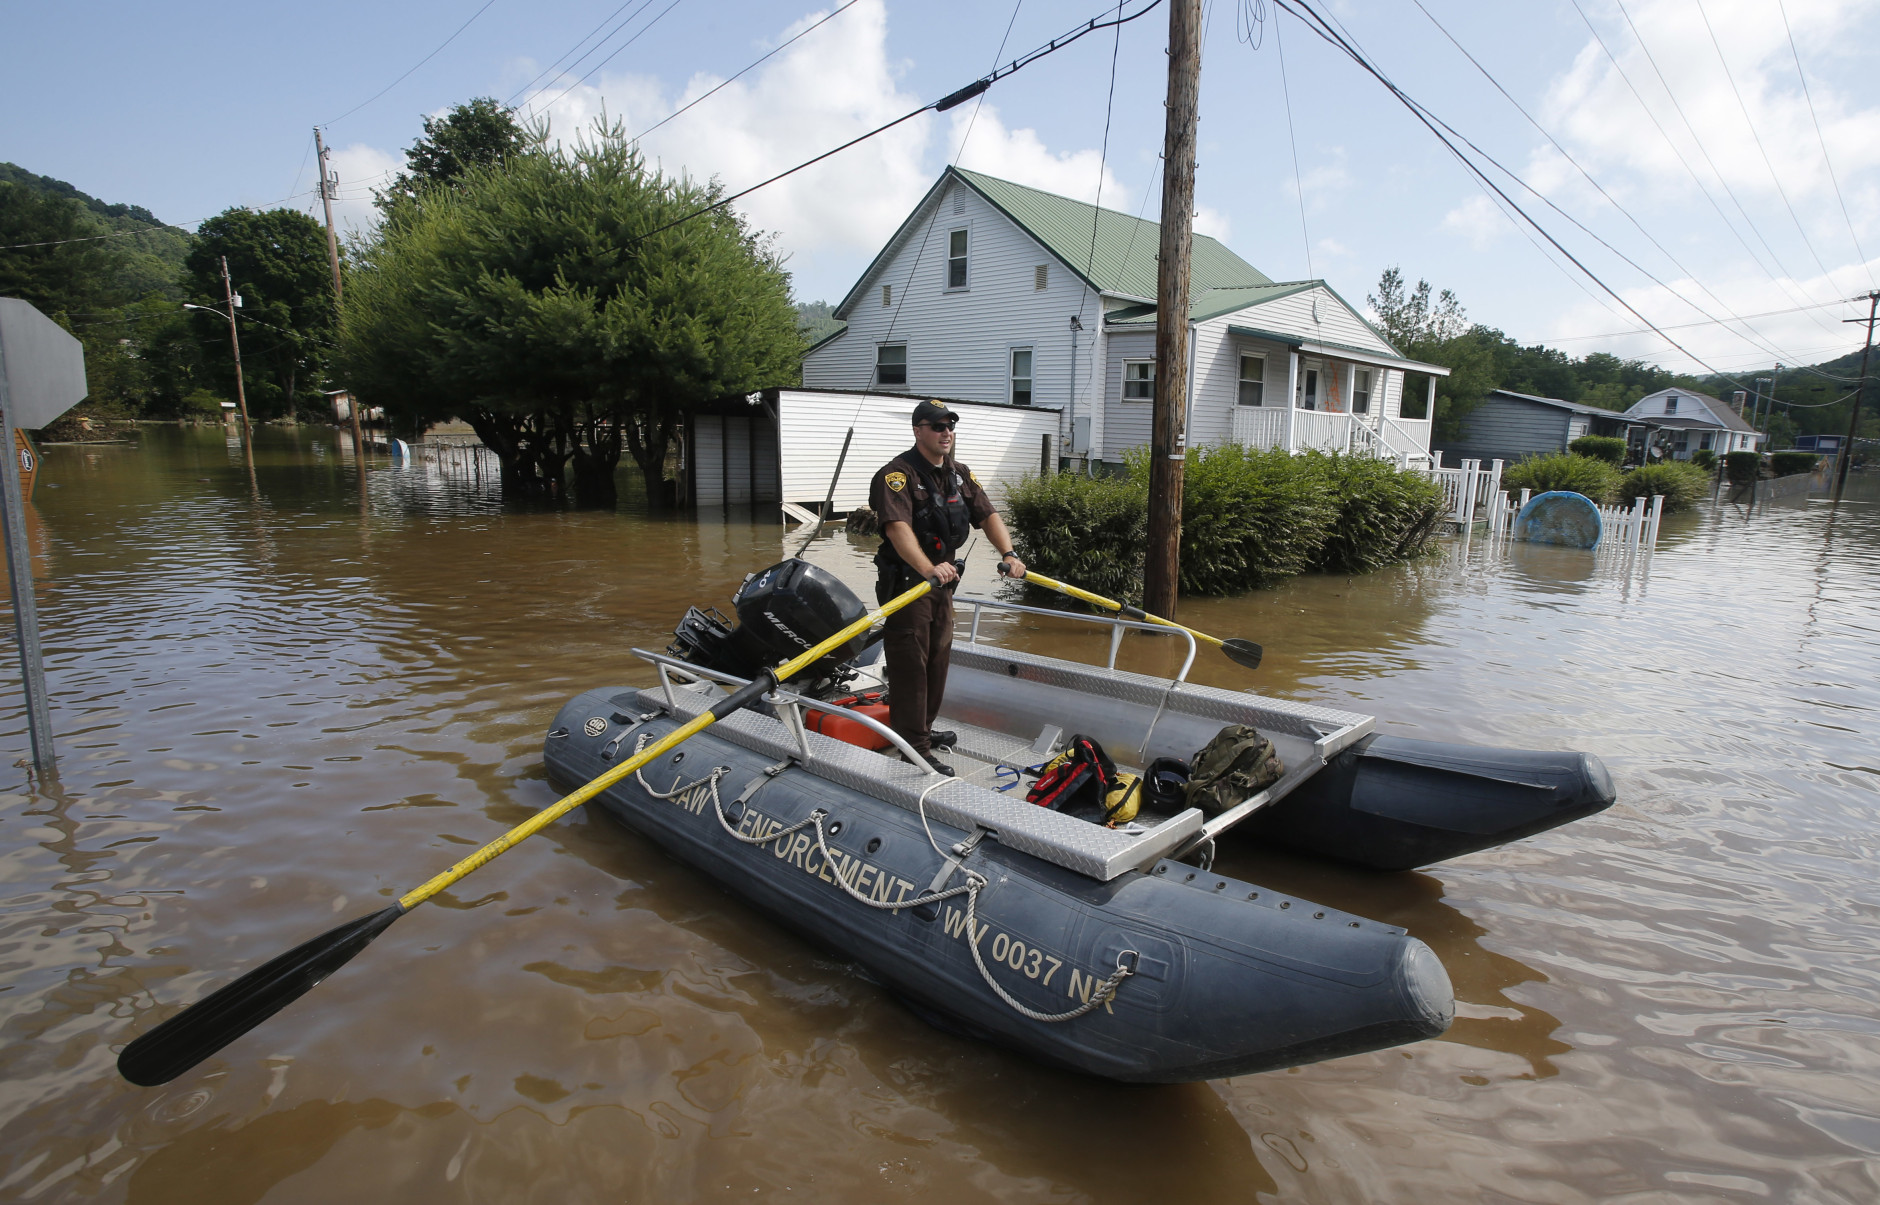 Lt. Dennis Feazell, of the West Virginia Department of Natural Resources, rows his boat as he and a co-worker search flooded homes in Rainelle, W. Va., Saturday, June 25, 2016.  About 32,000 West Virginia homes and businesses remain without power Saturday after severe flooding hit the state. The West Virginia Division of Homeland Security and Emergency Management also said Saturday that more than 60 secondary roads in the state were closed.(AP Photo/Steve Helber)